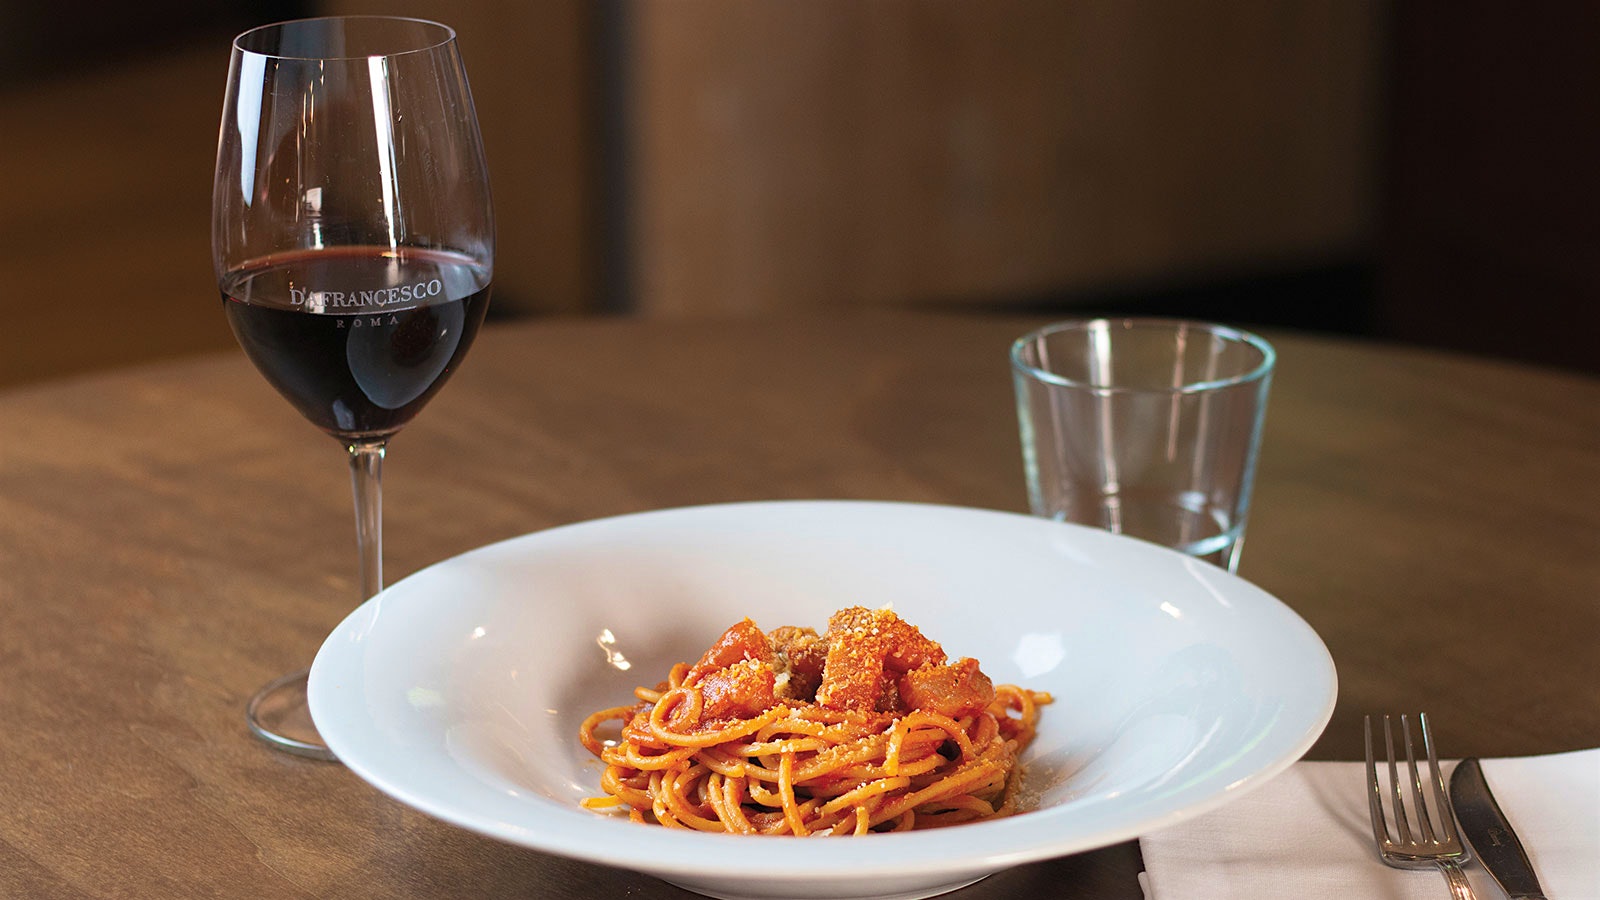  A plate of Spaghettoni all’amatriciana with a glass of red wine